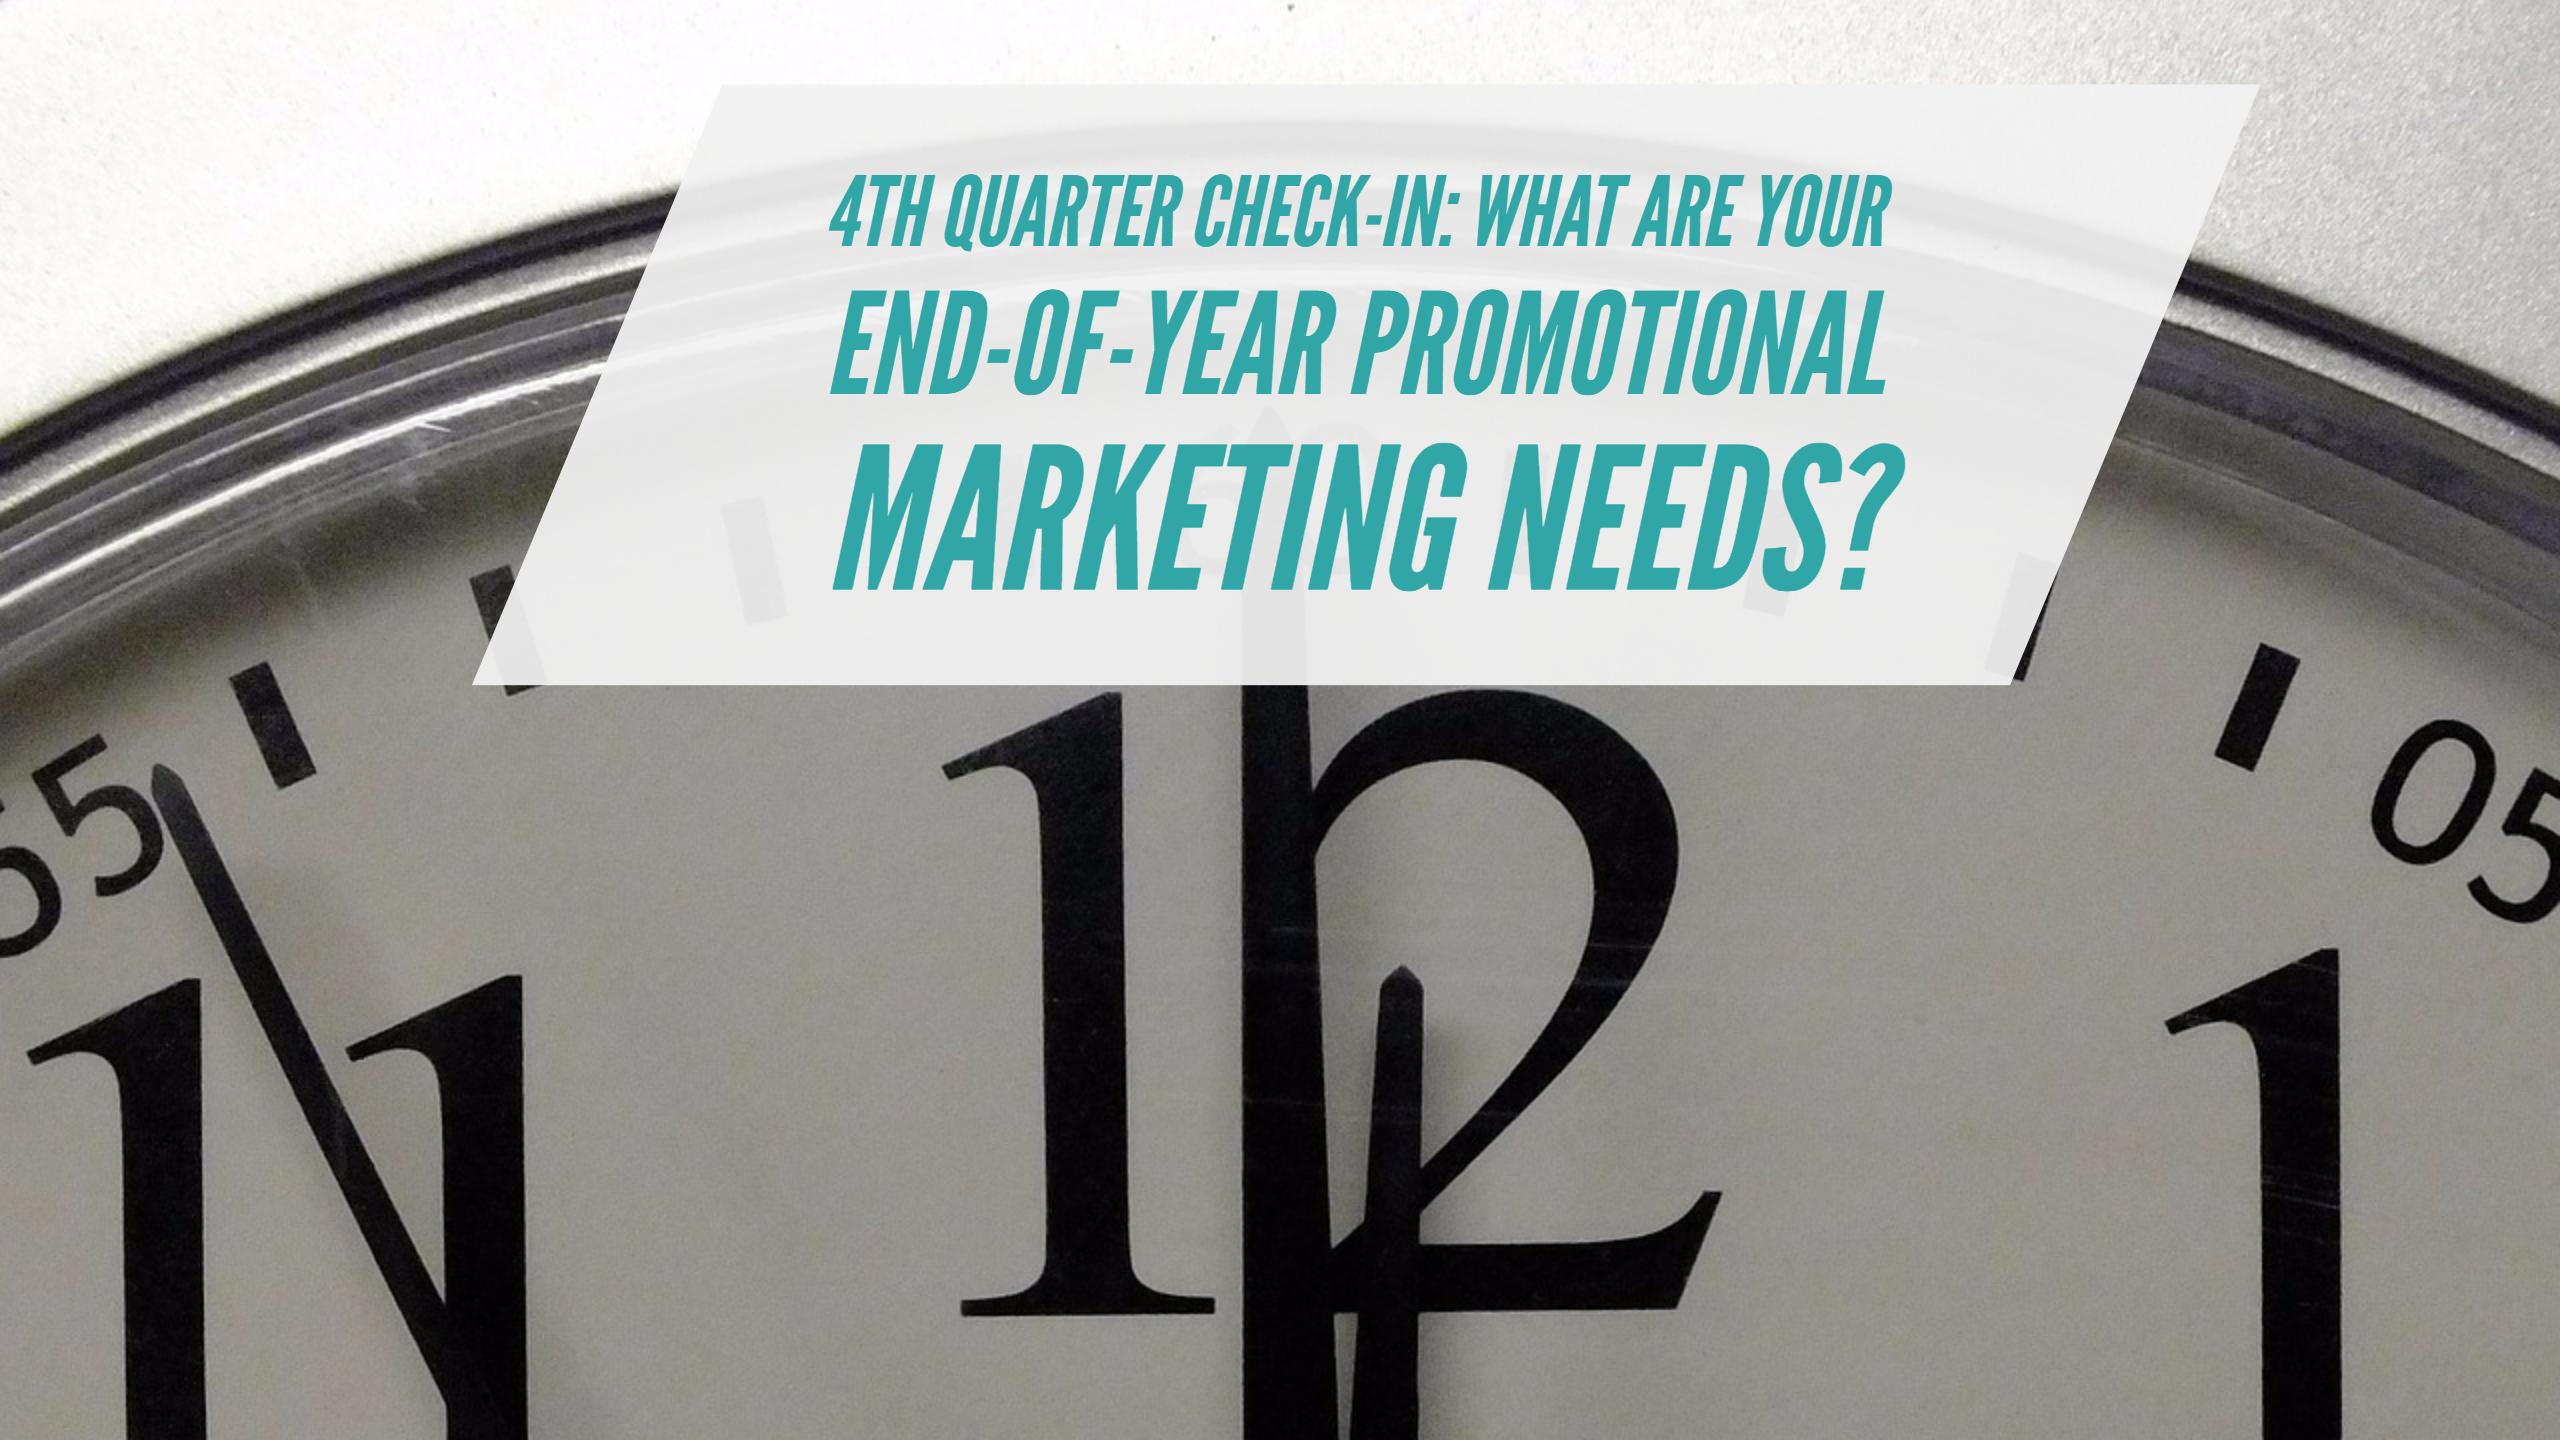 4th Quarter Check-In: What Are Your End-of-Year Promotional Marketing Needs?